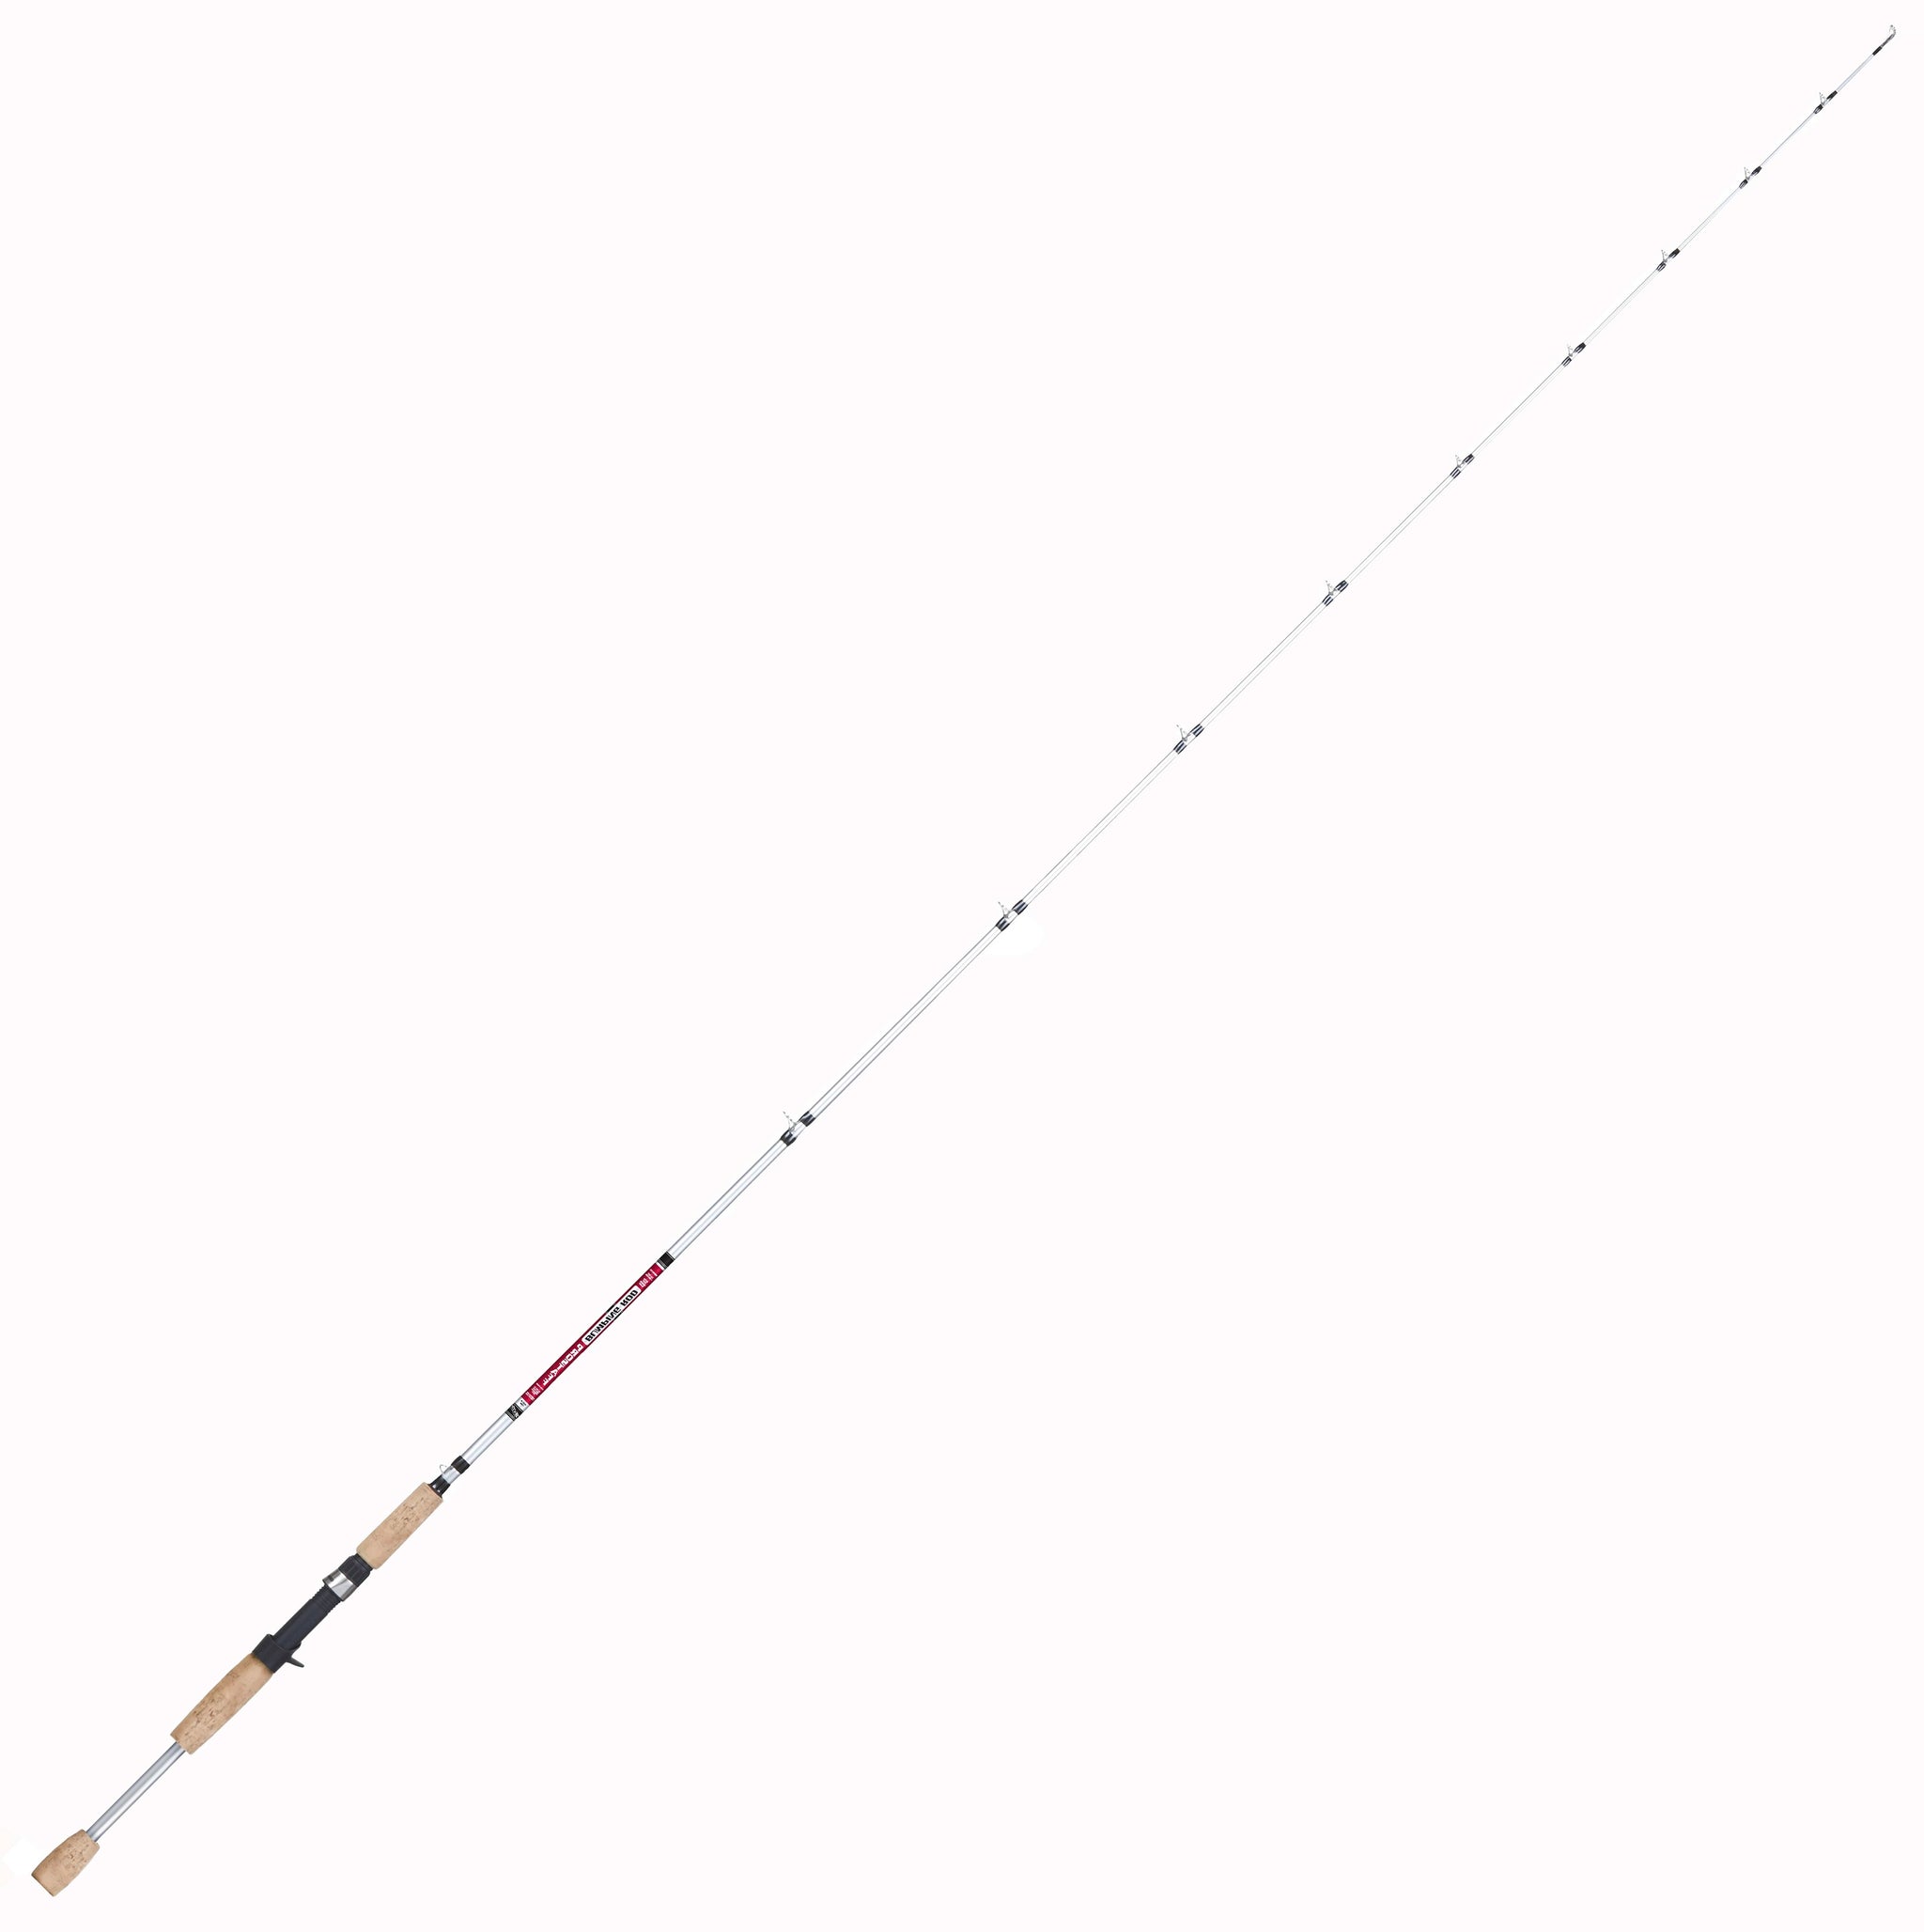 BnM SILVER CAT MAGNUM 10' CATFISH SPINNING ROD CRAPPIE POLE MAG10S